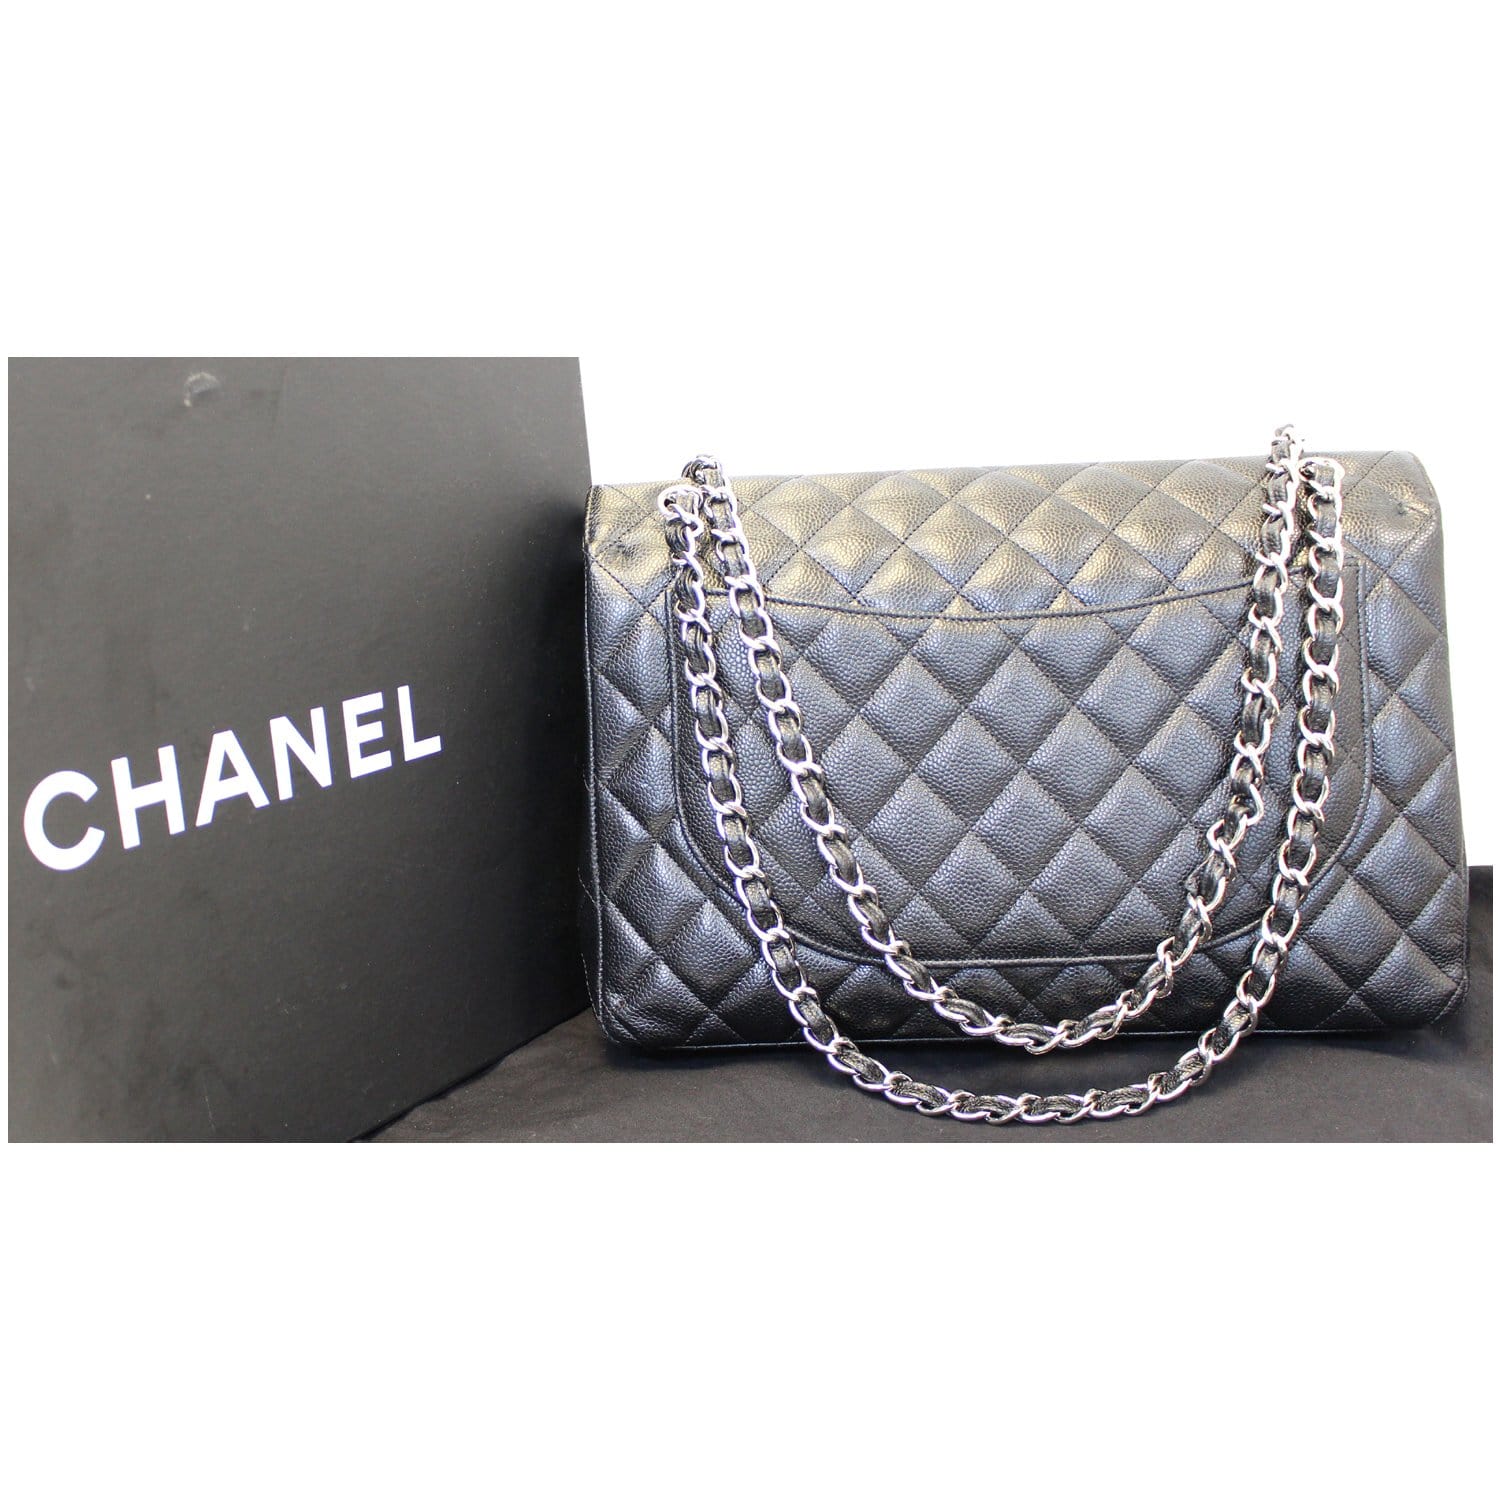 CHANEL, Bags, Chanel Maxi Classic Double Flap Bagblack Lambskin